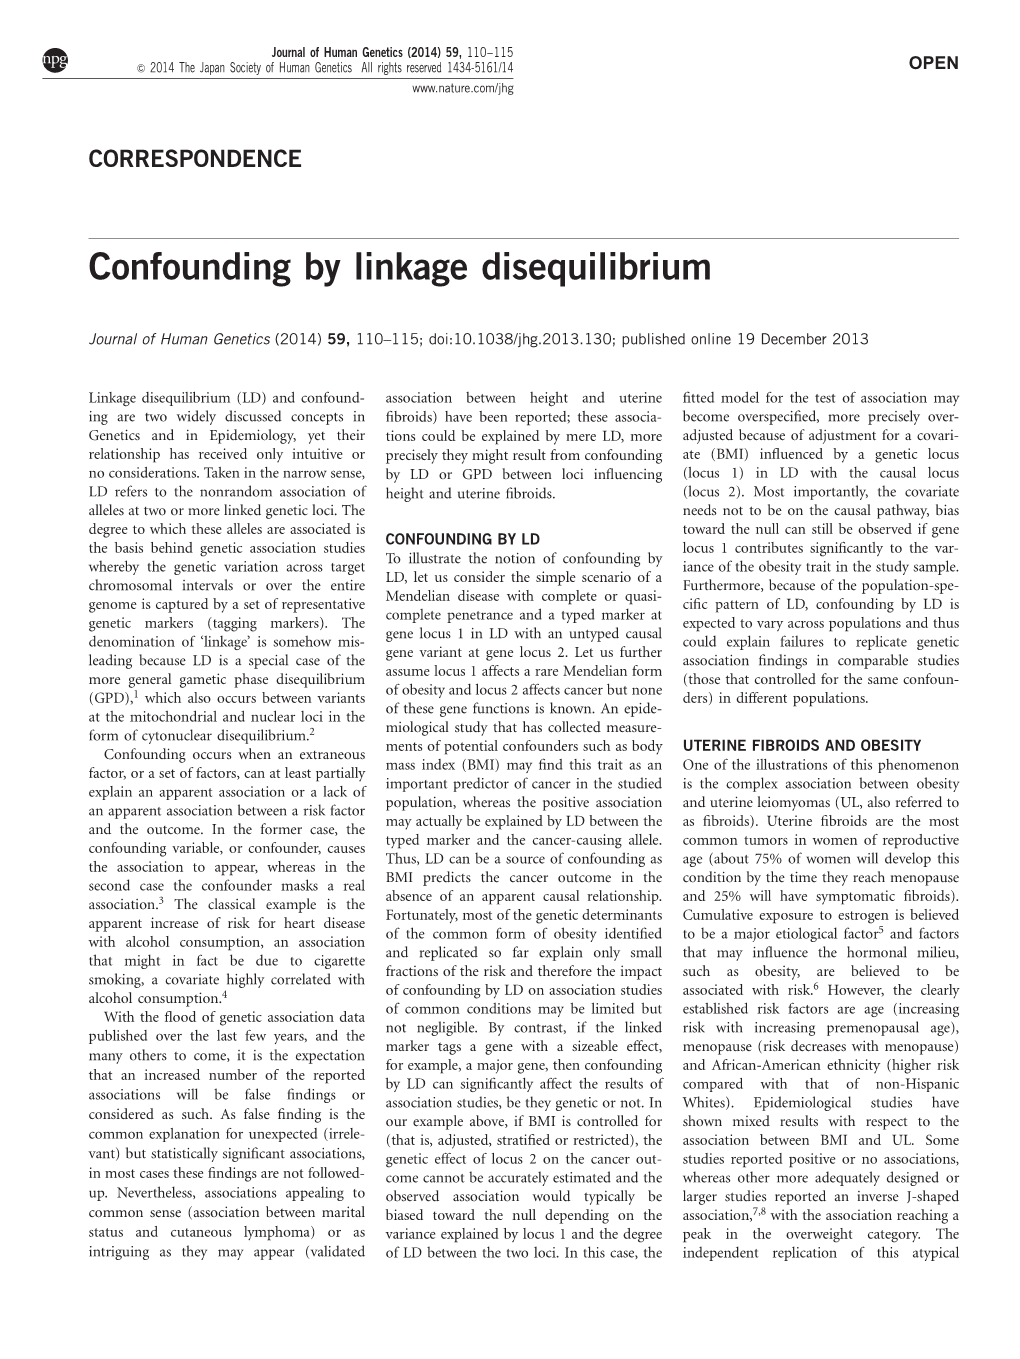 Confounding by Linkage Disequilibrium